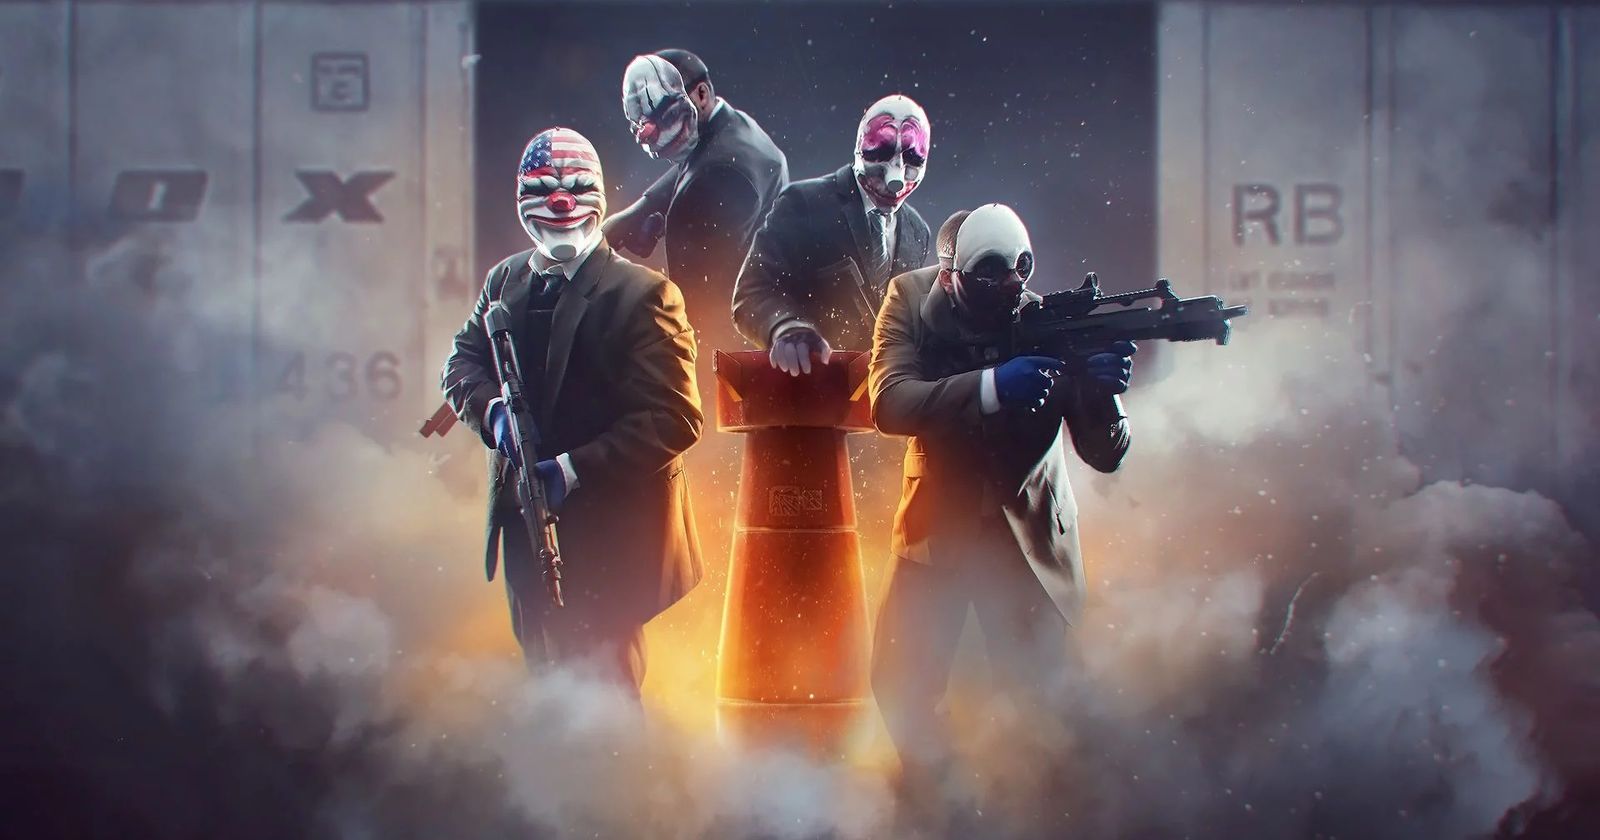 How to play Payday 3 crossplay with friends